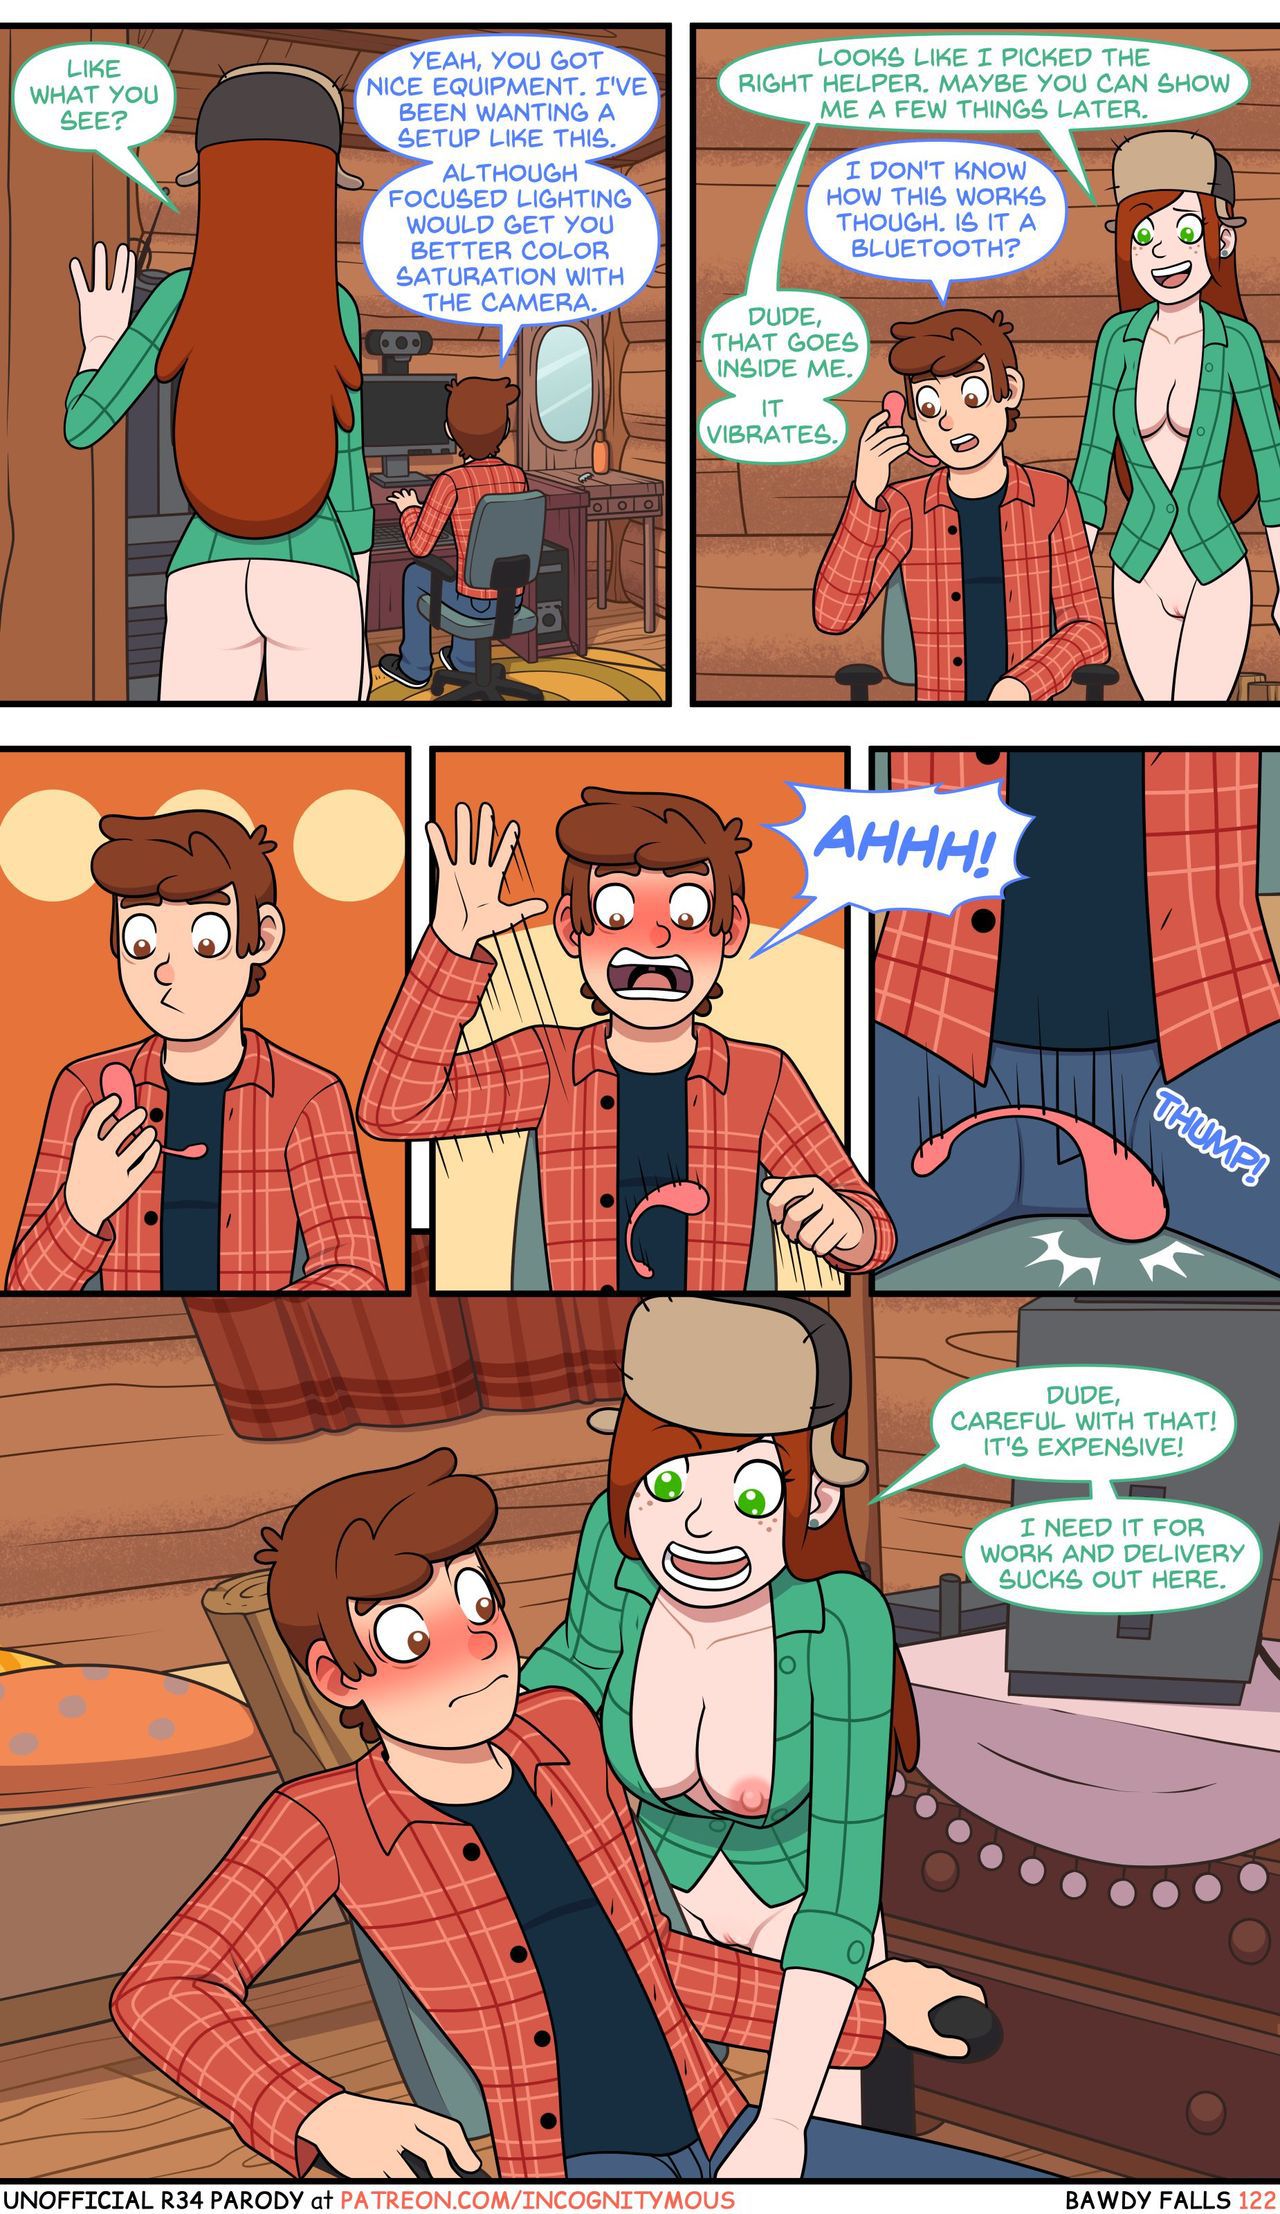 Bawdy Falls (Gravity Falls) [Incognitymous] - 3 - ongoing - english 2